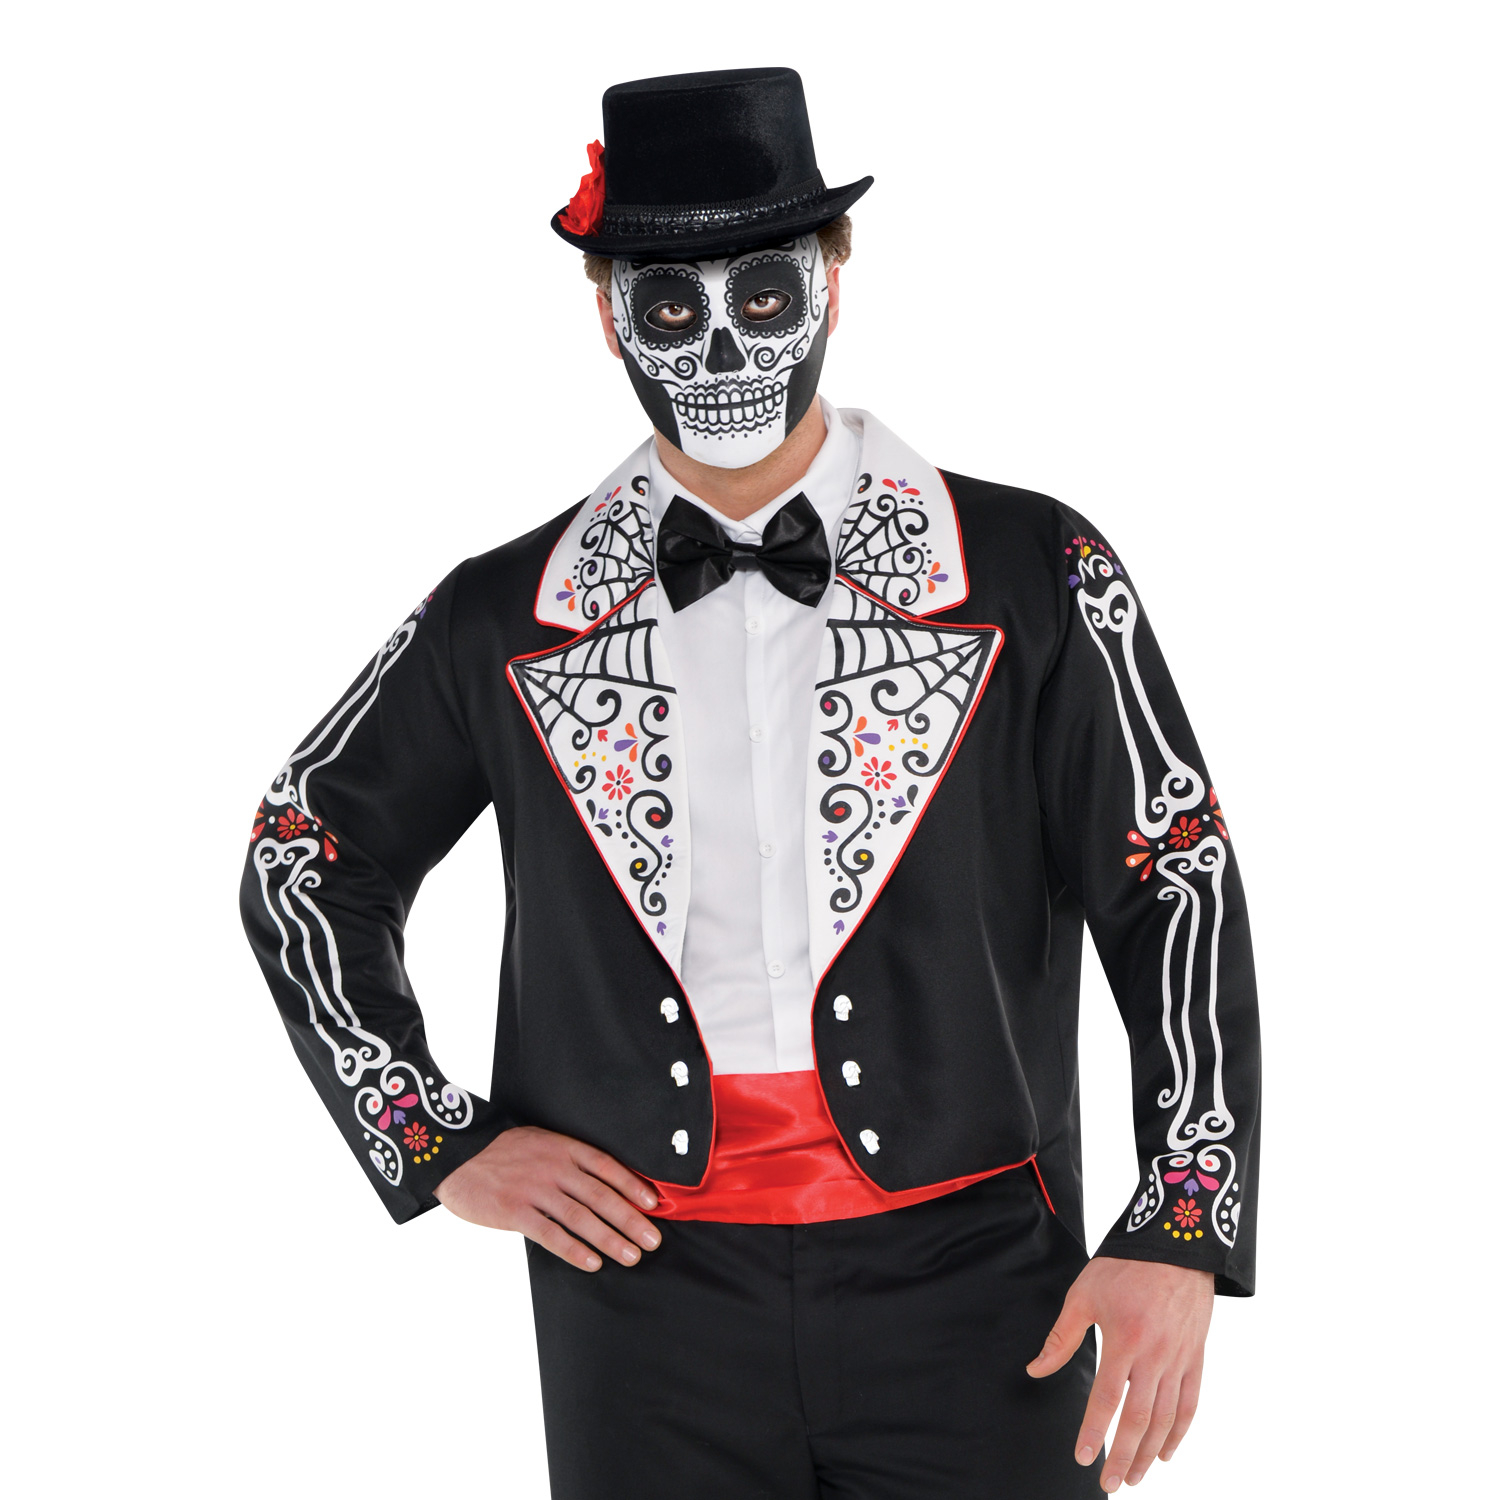 plus size day of the dead costume uk